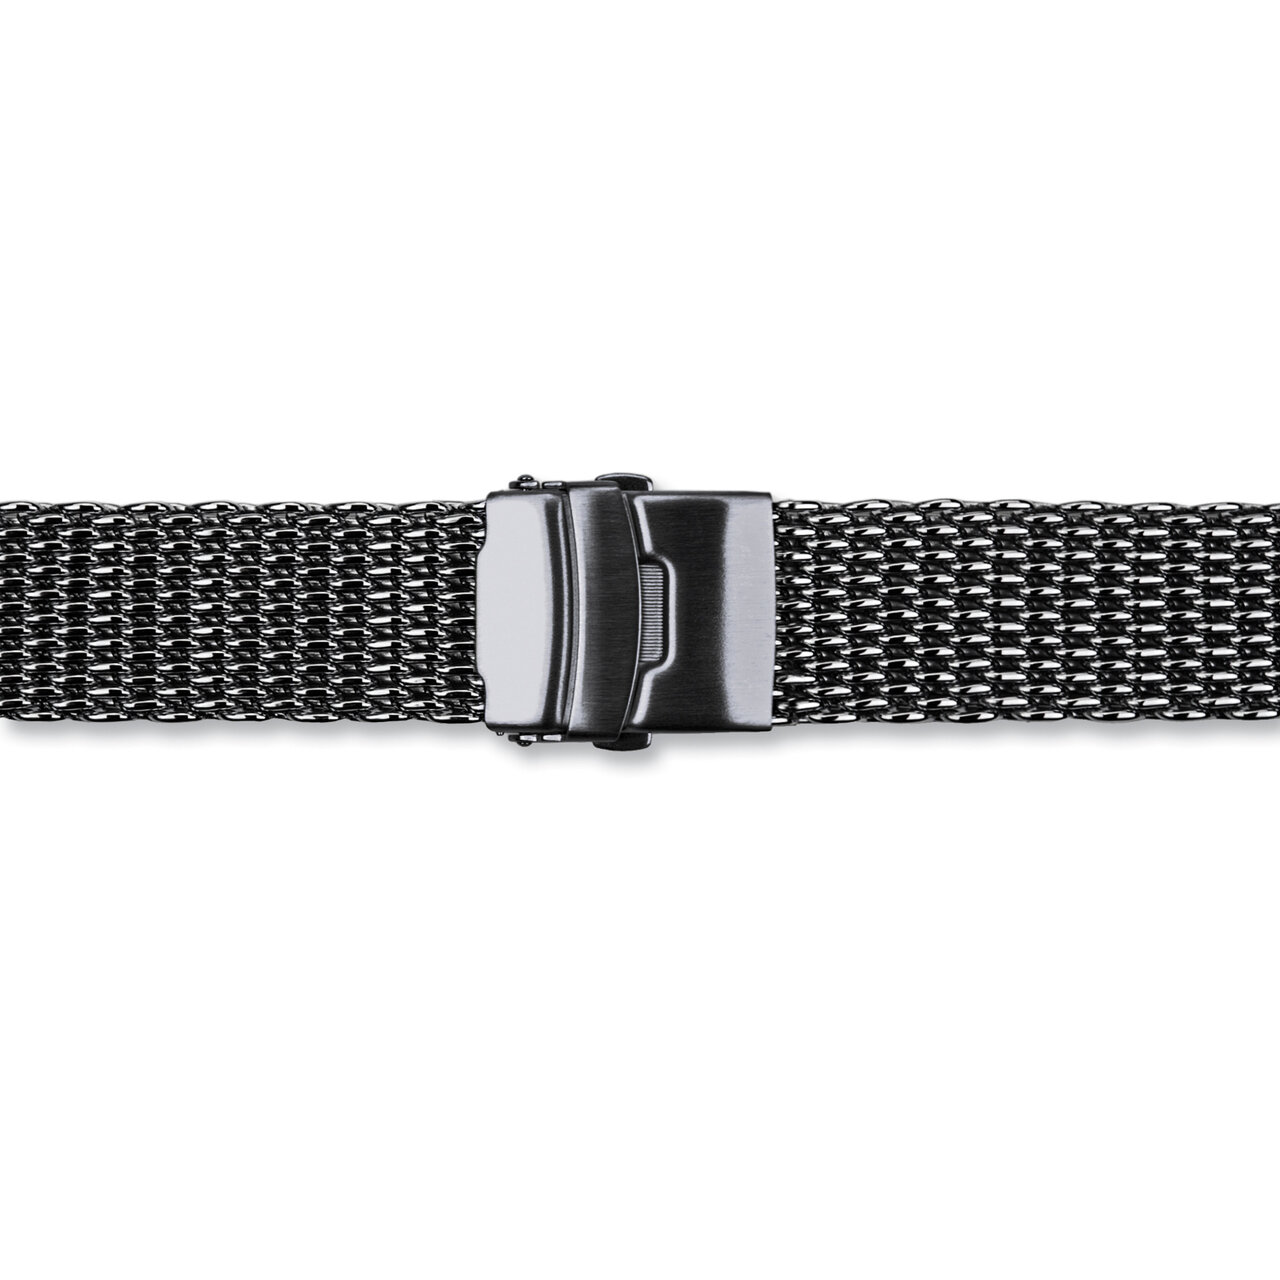 24mm PVD-Black Stainless Shark Mesh with Divers Watch Band BA420-24